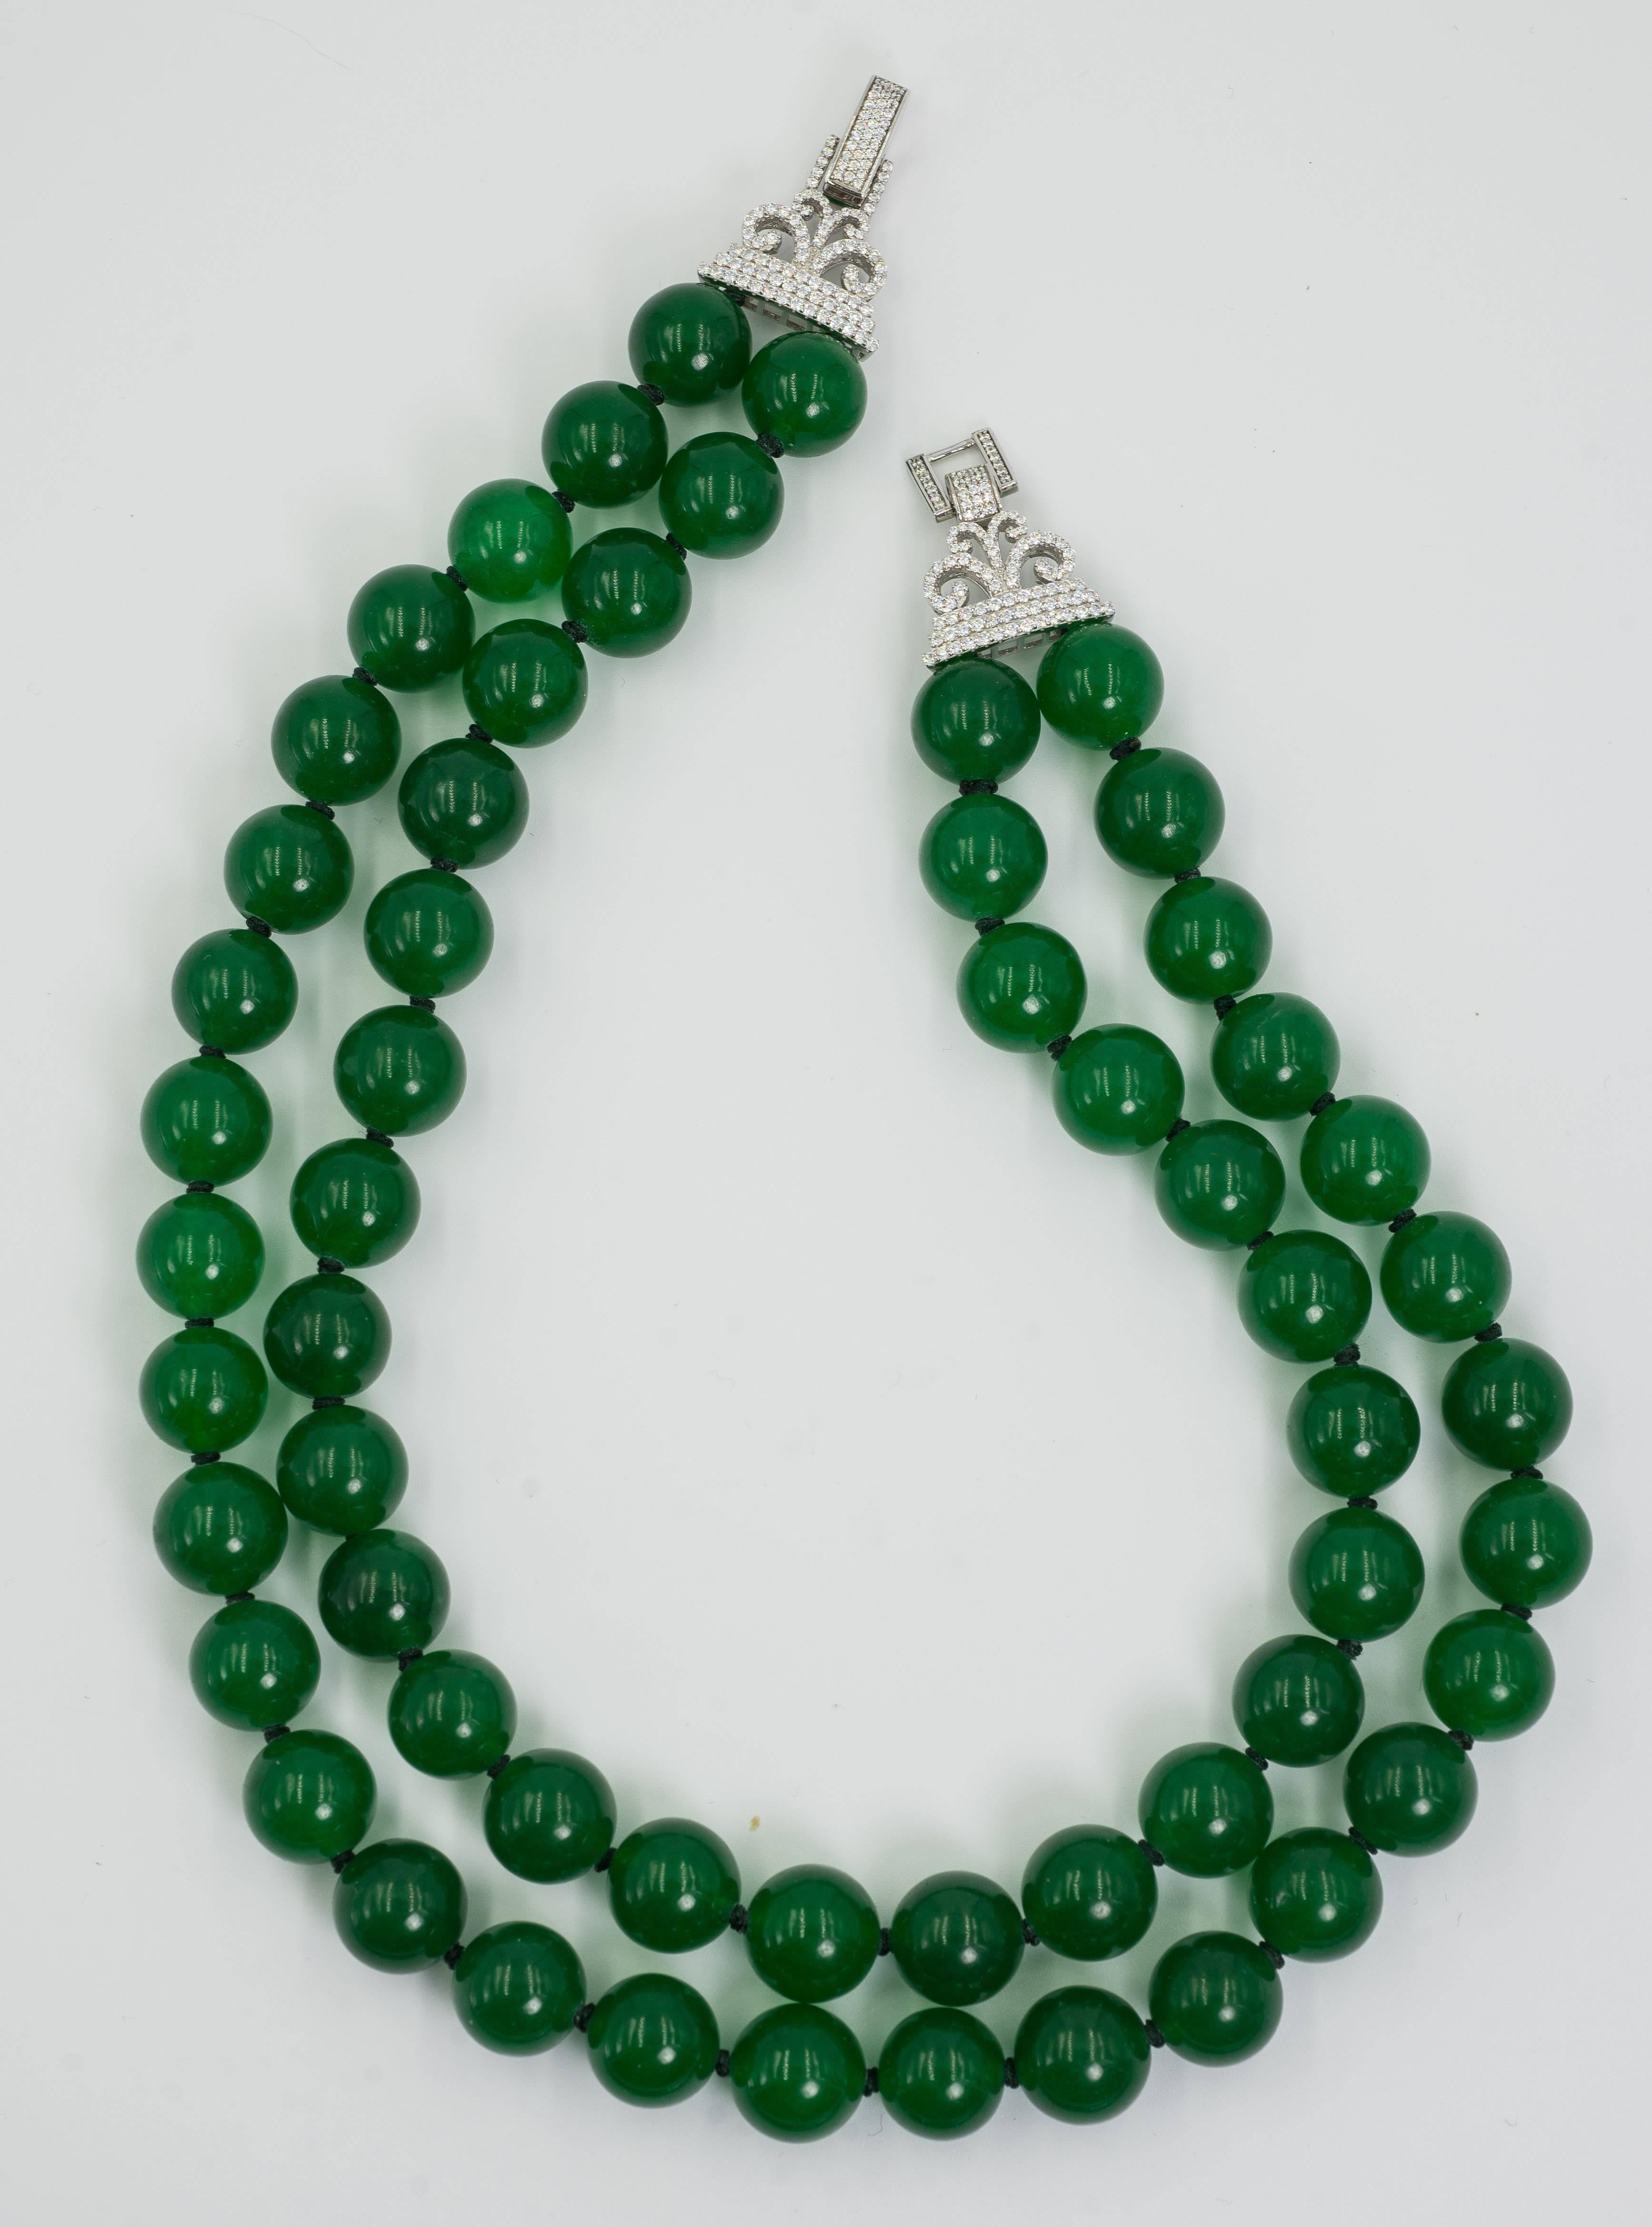 Elegant two strand faux Imperial Jade bead necklace made with 14mm Imperial Jade color natural stone beads beautifully strung to a wonderful 2'' faux diamond set sterling silver clasp. The necklace fits an 18'' neck and is 1'' deep.

Elegant and